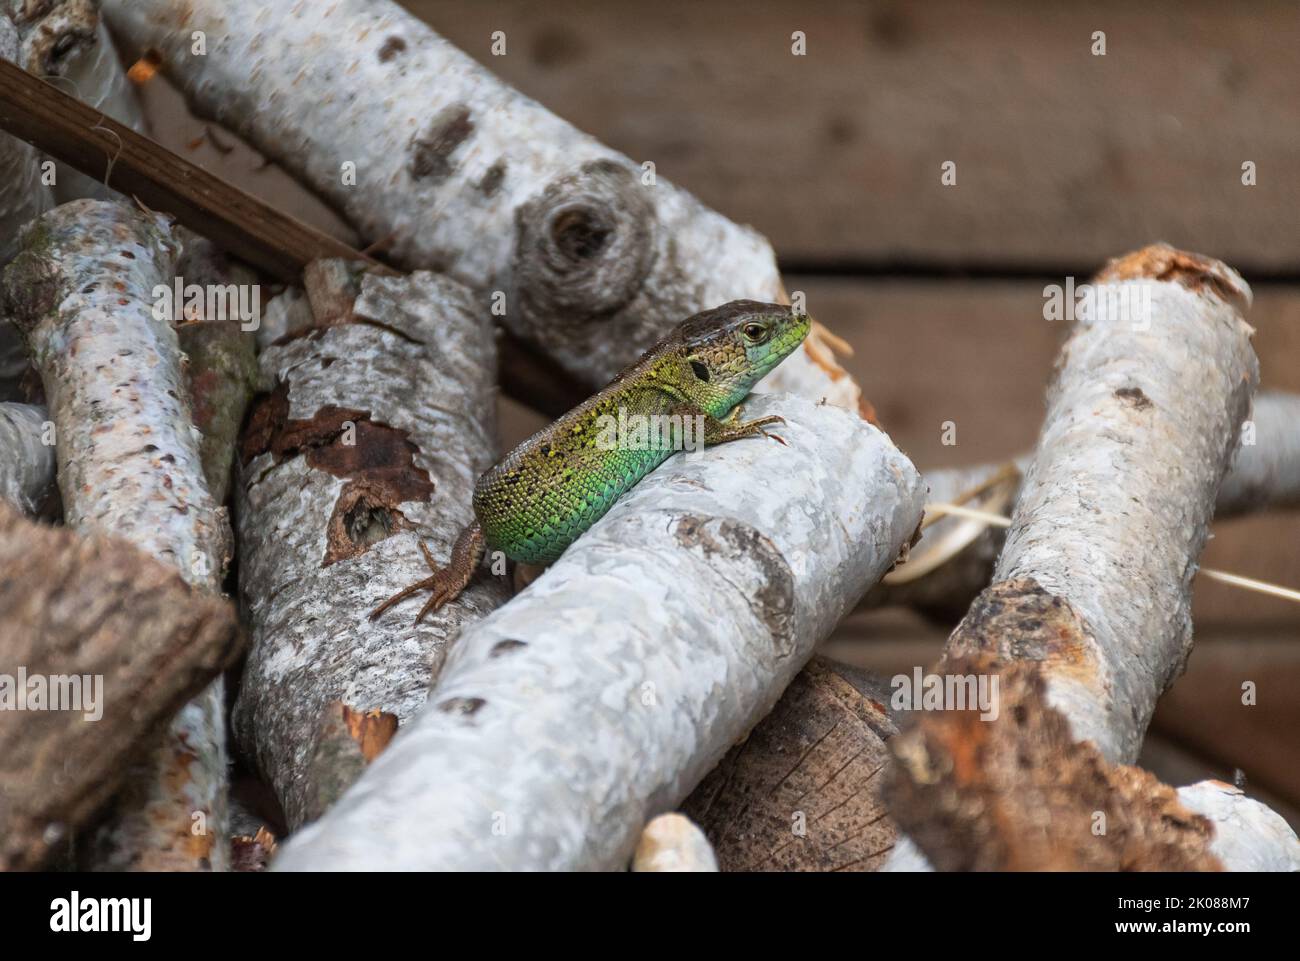 male sand lizard with beautiful green coloring resting in a pile of birch branches Stock Photo